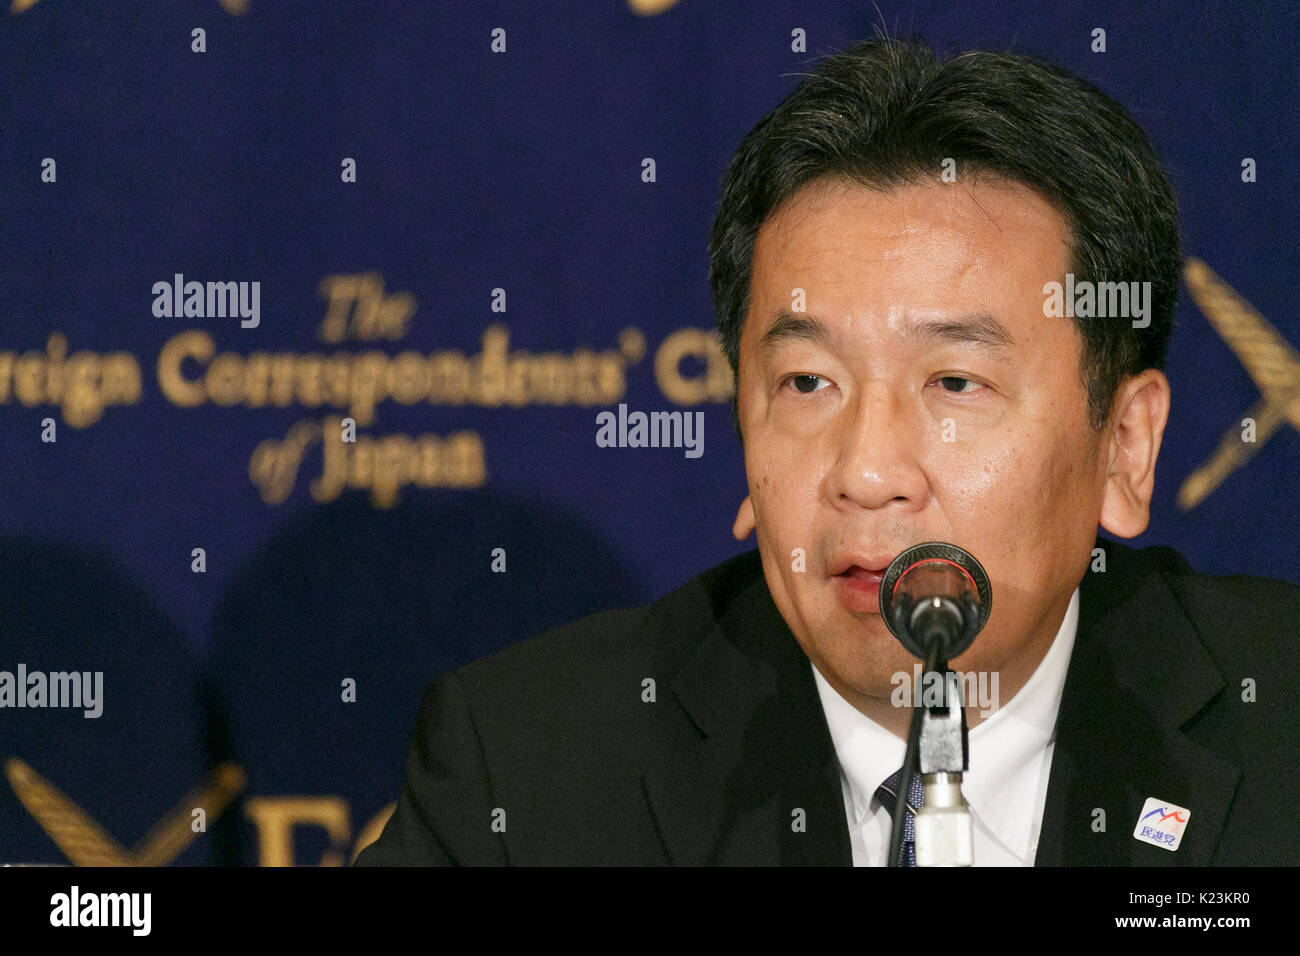 Former Democratic Party (DP) Secretary General Yukio Edano speaks during a news conference at the Foreign Correspondents' Club of Japan on August 29, 2017, Tokyo, Japan. Edano and former DP Foreign Minister, Maehara, visited the Club to speak about the opposition party's leadership election which will be held on September 1st. They also commented North Korea's missile launch that flew over Japan this morning. Credit: Rodrigo Reyes Marin/AFLO/Alamy Live News Stock Photo